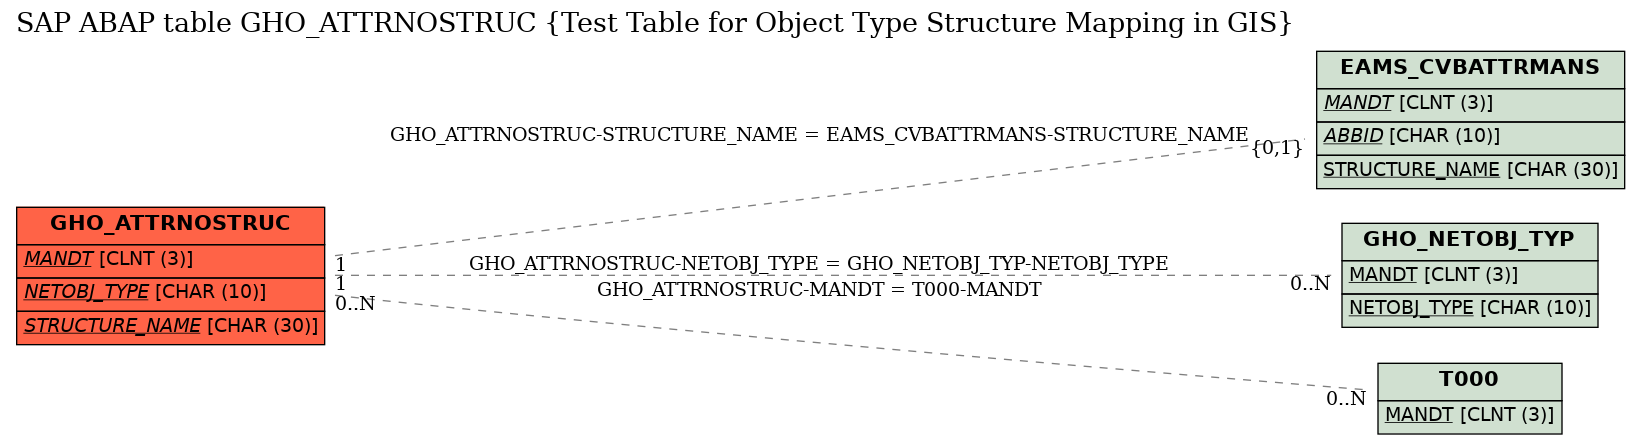 E-R Diagram for table GHO_ATTRNOSTRUC (Test Table for Object Type Structure Mapping in GIS)